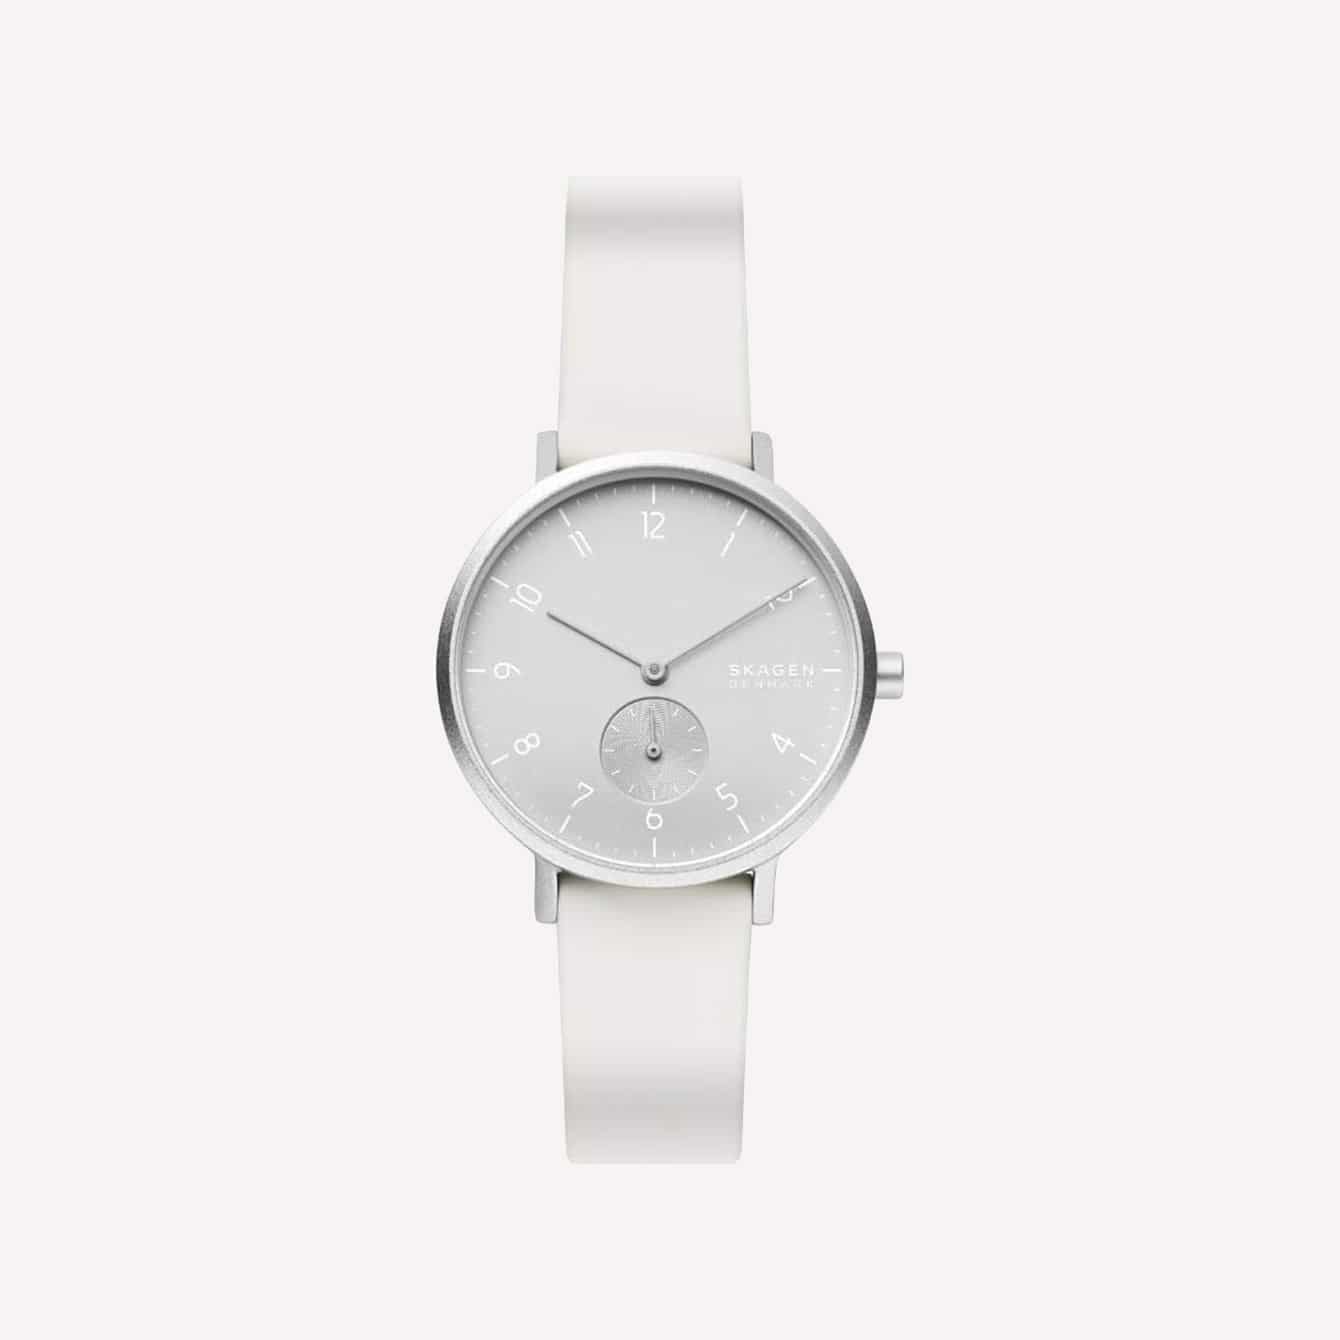 15 of the Best Minimalist Watches for Men-10